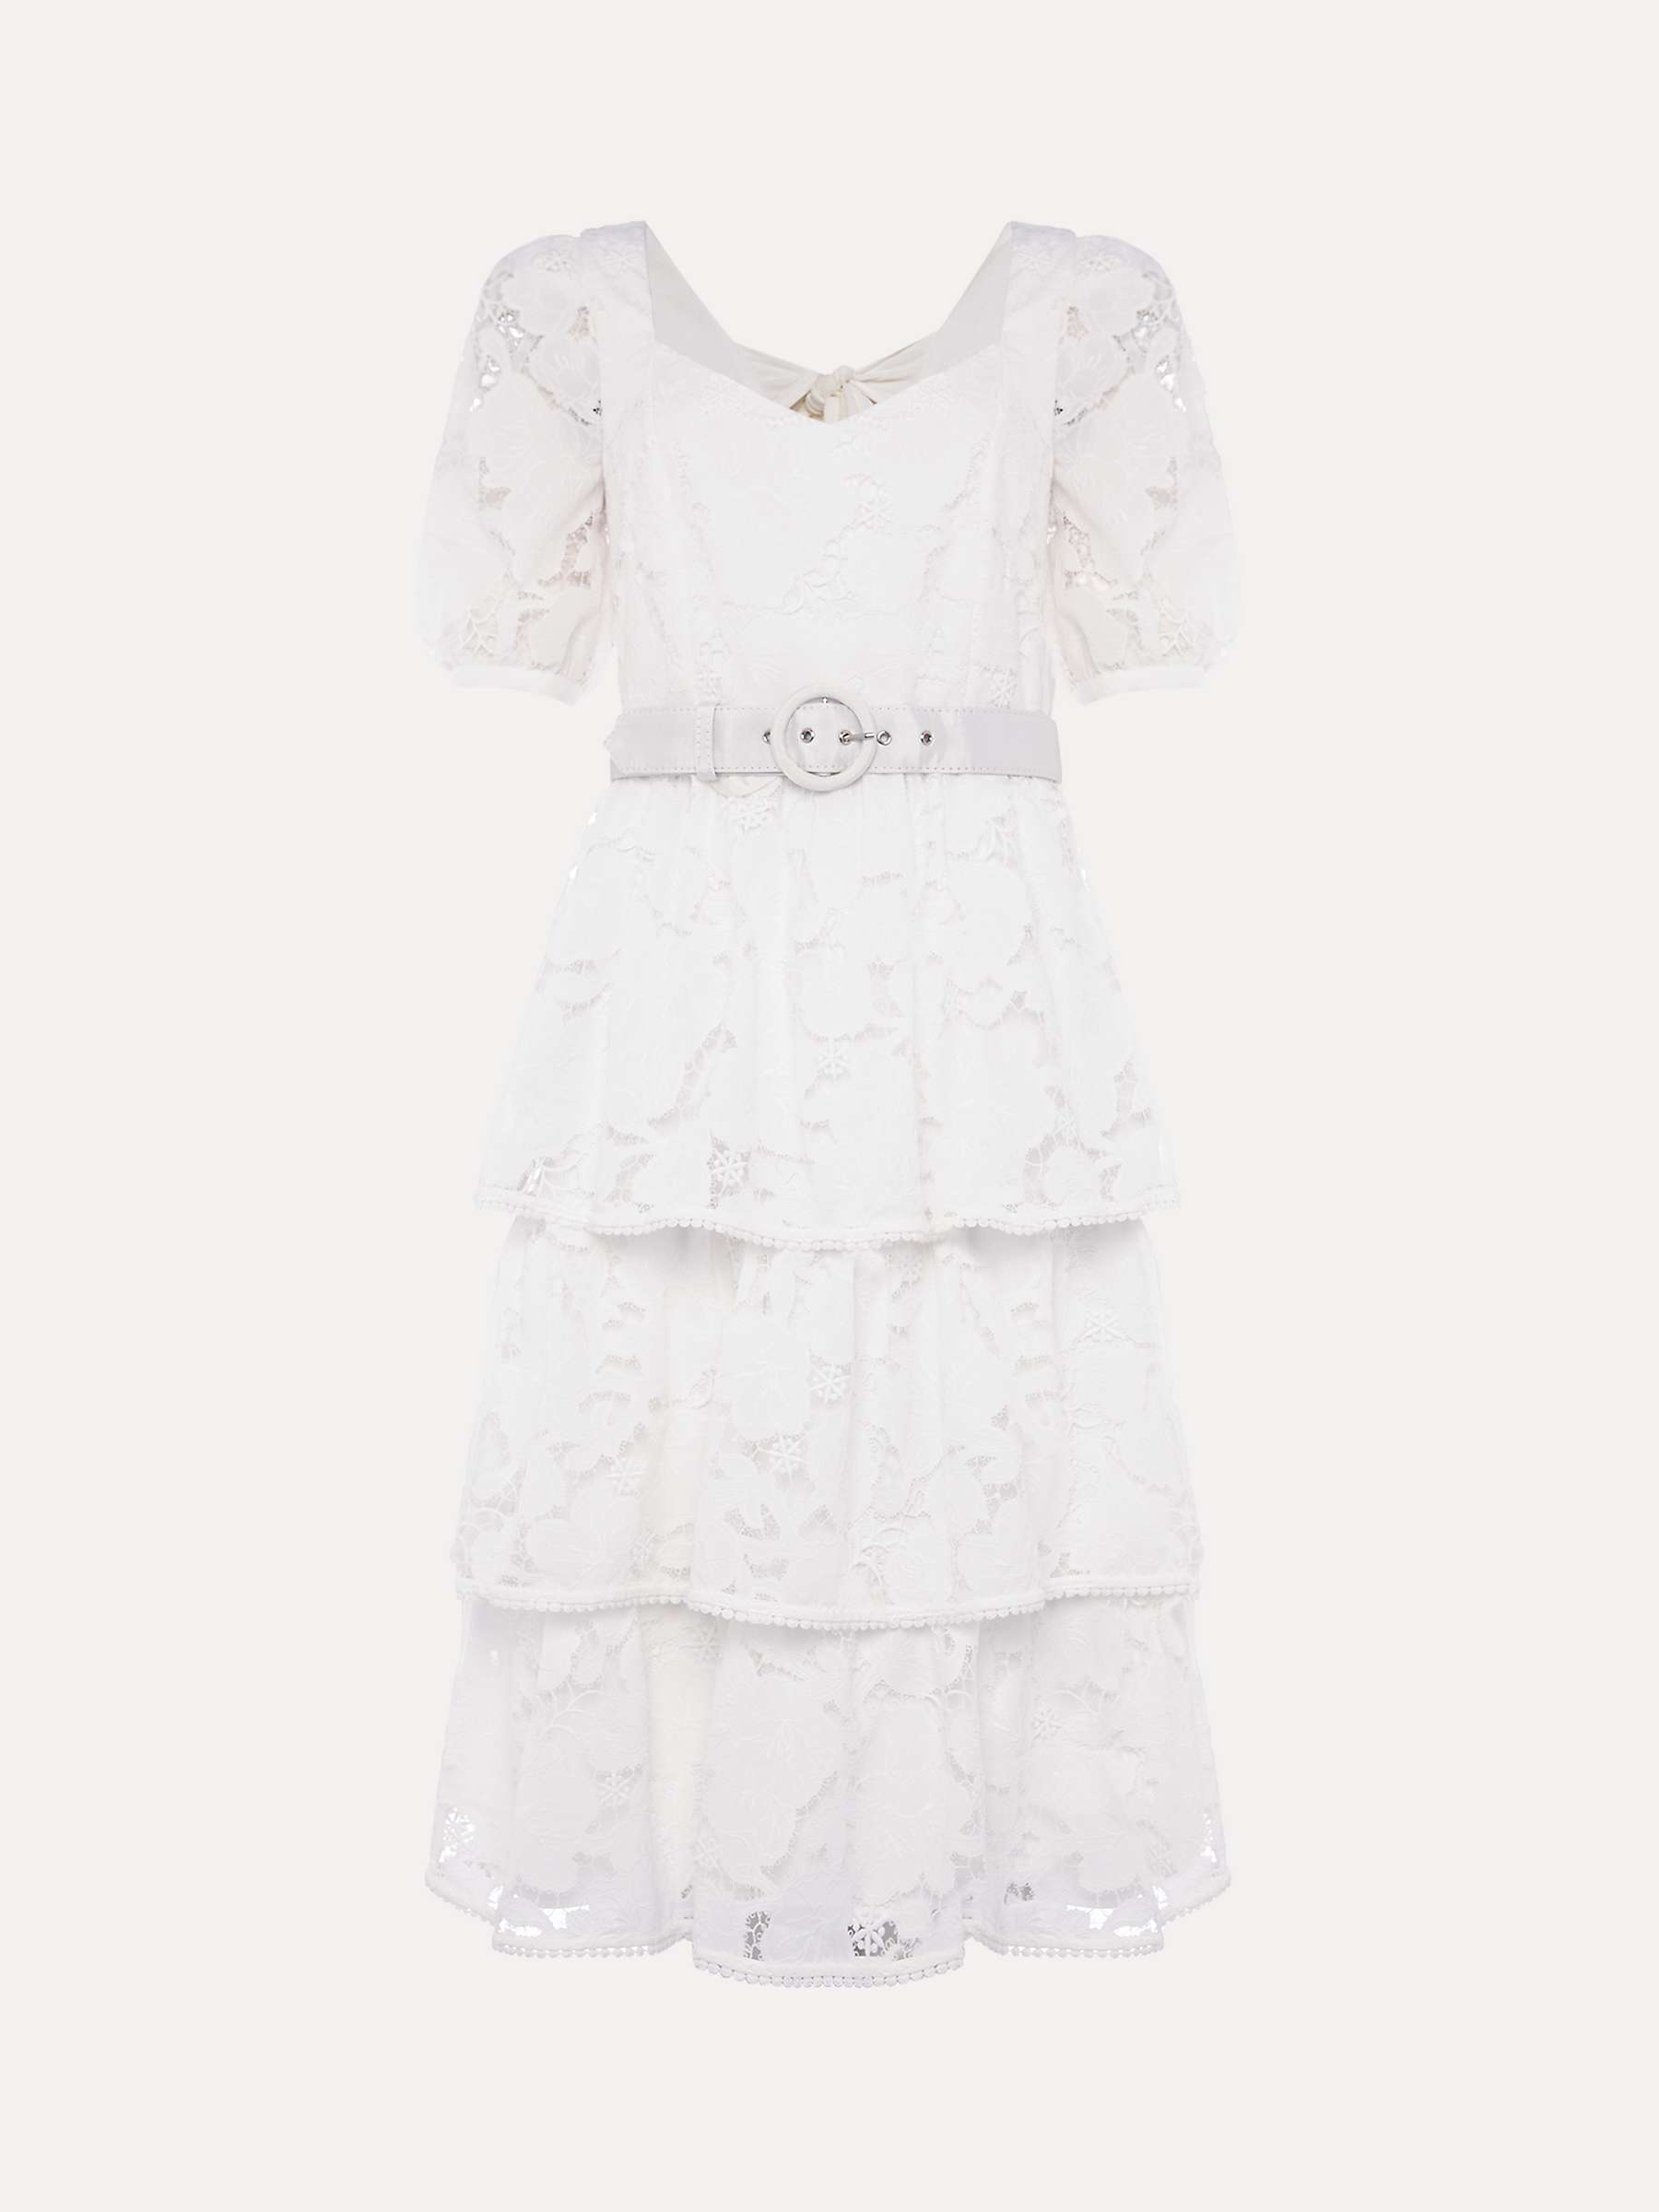 Buy Phase Eight Elyse Lace Tiered Wedding Dress, Ivory Online at johnlewis.com